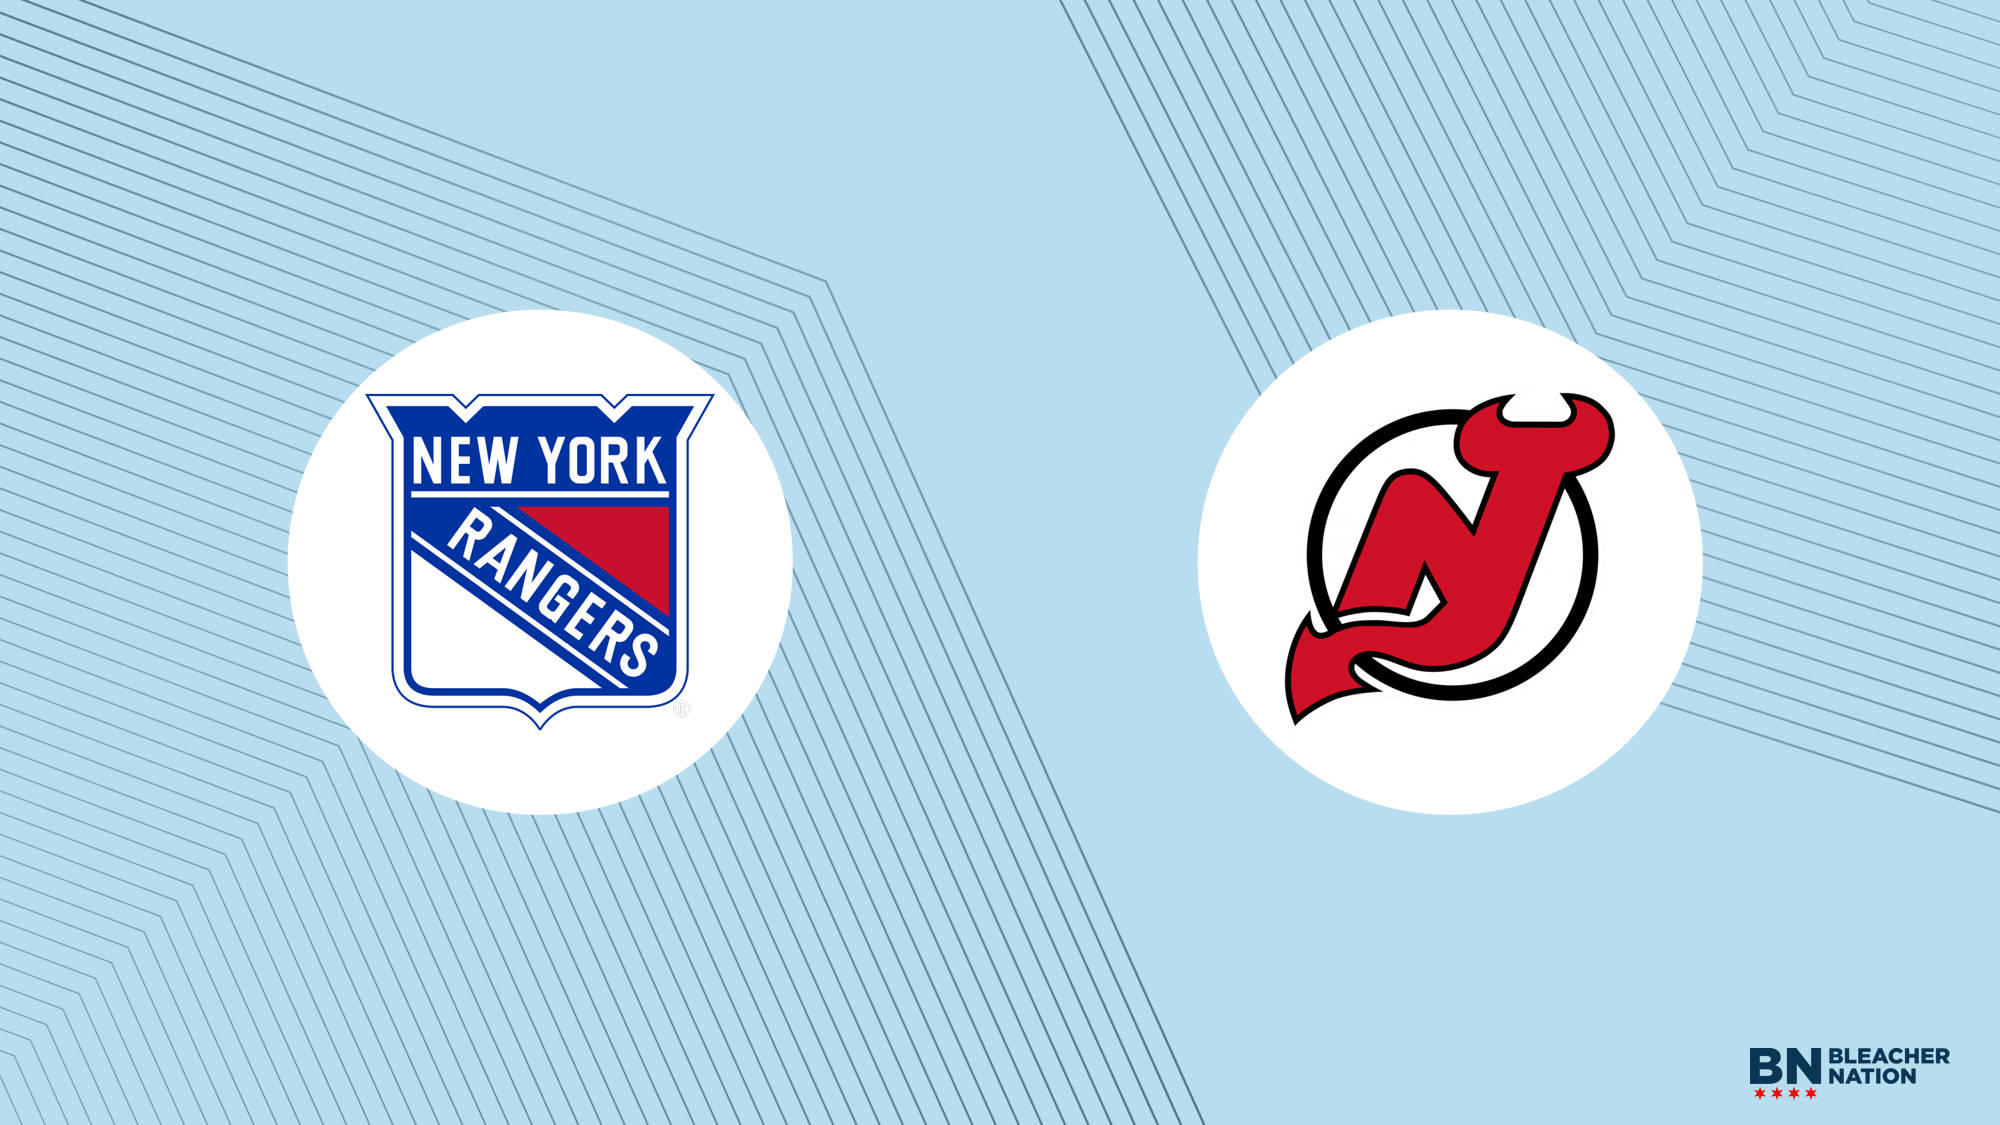 New York Rangers vs. New Jersey Devils 2023 Matchup Tickets & Locations